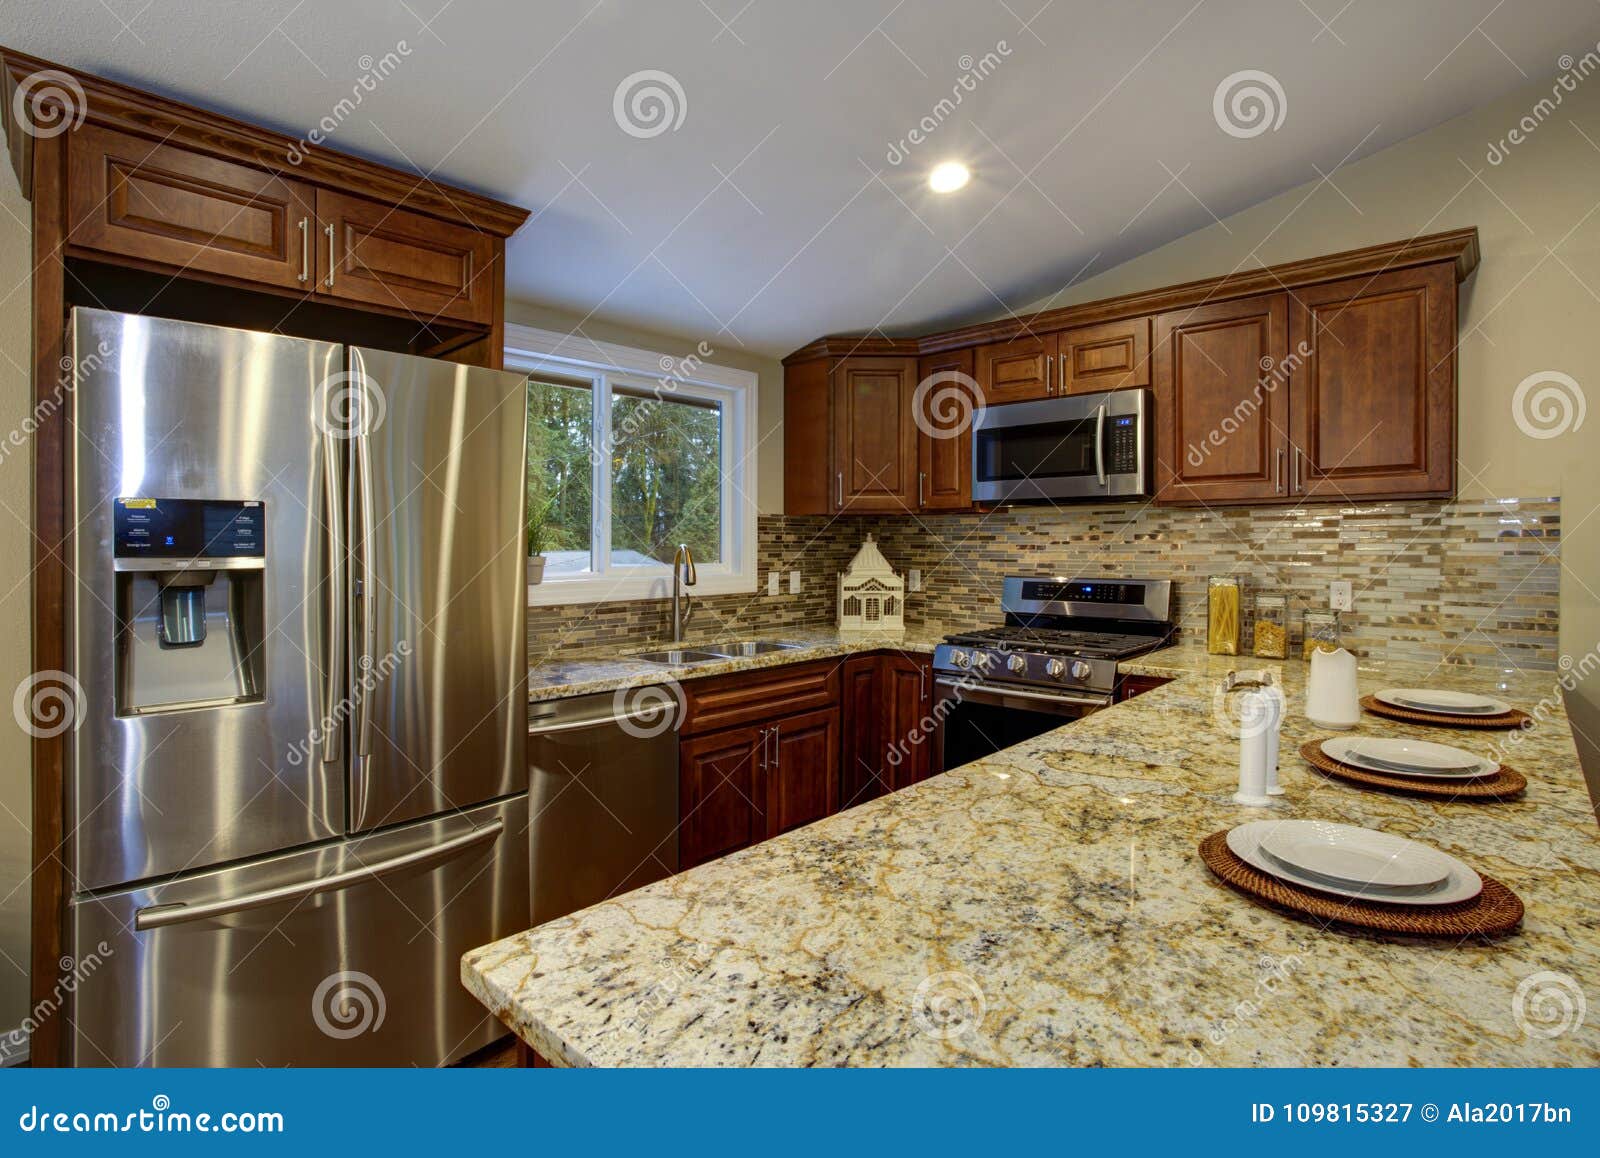 Brown Kitchen Design With Mahogany Kitchen Cabinets Stock Image Image Of Shiny Architecture 109815327